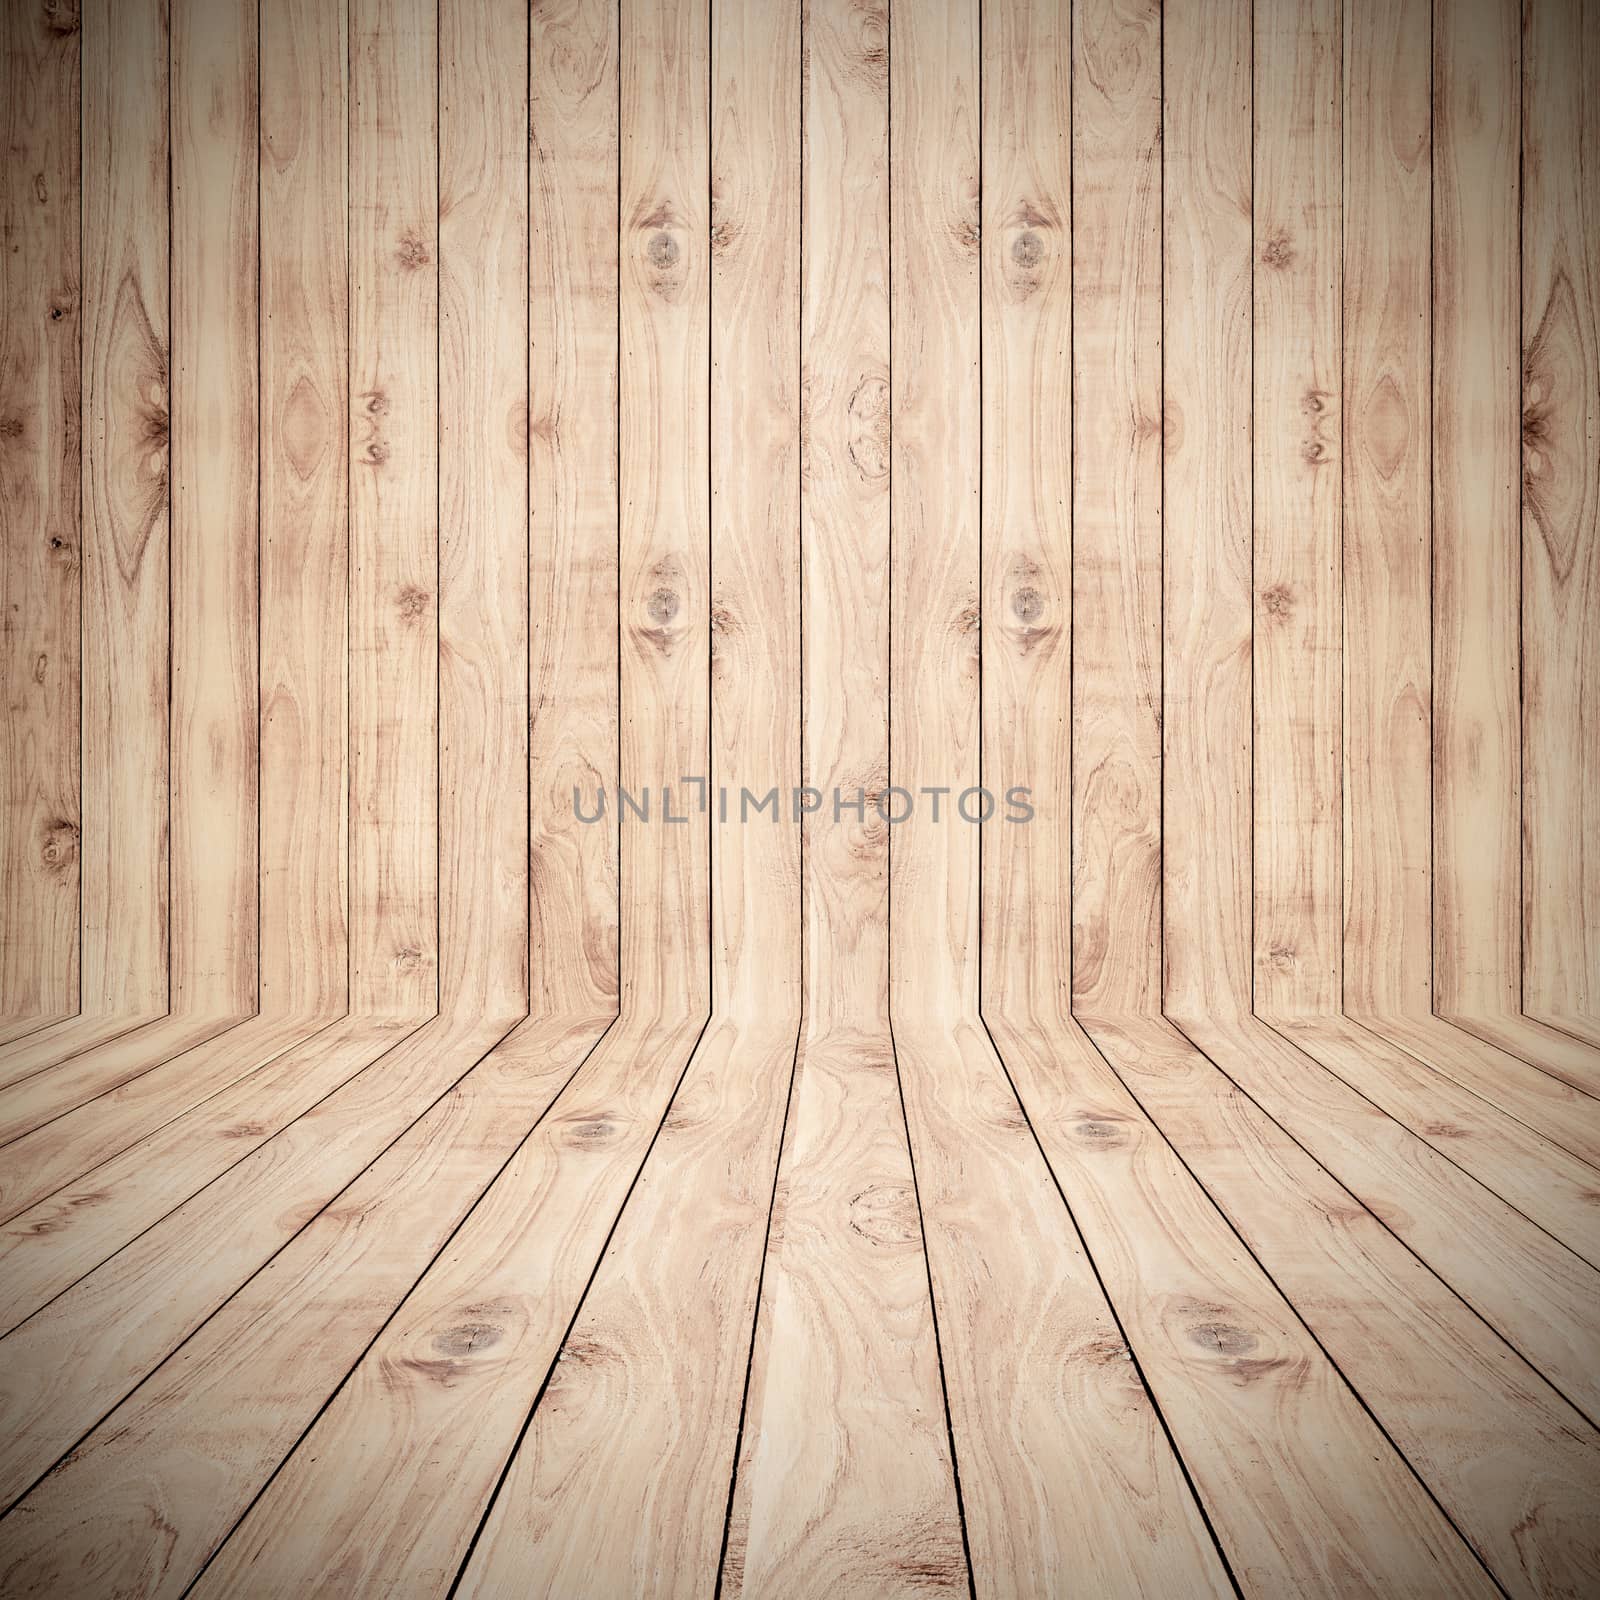 Brown wood planks floor texture and background wallpaper